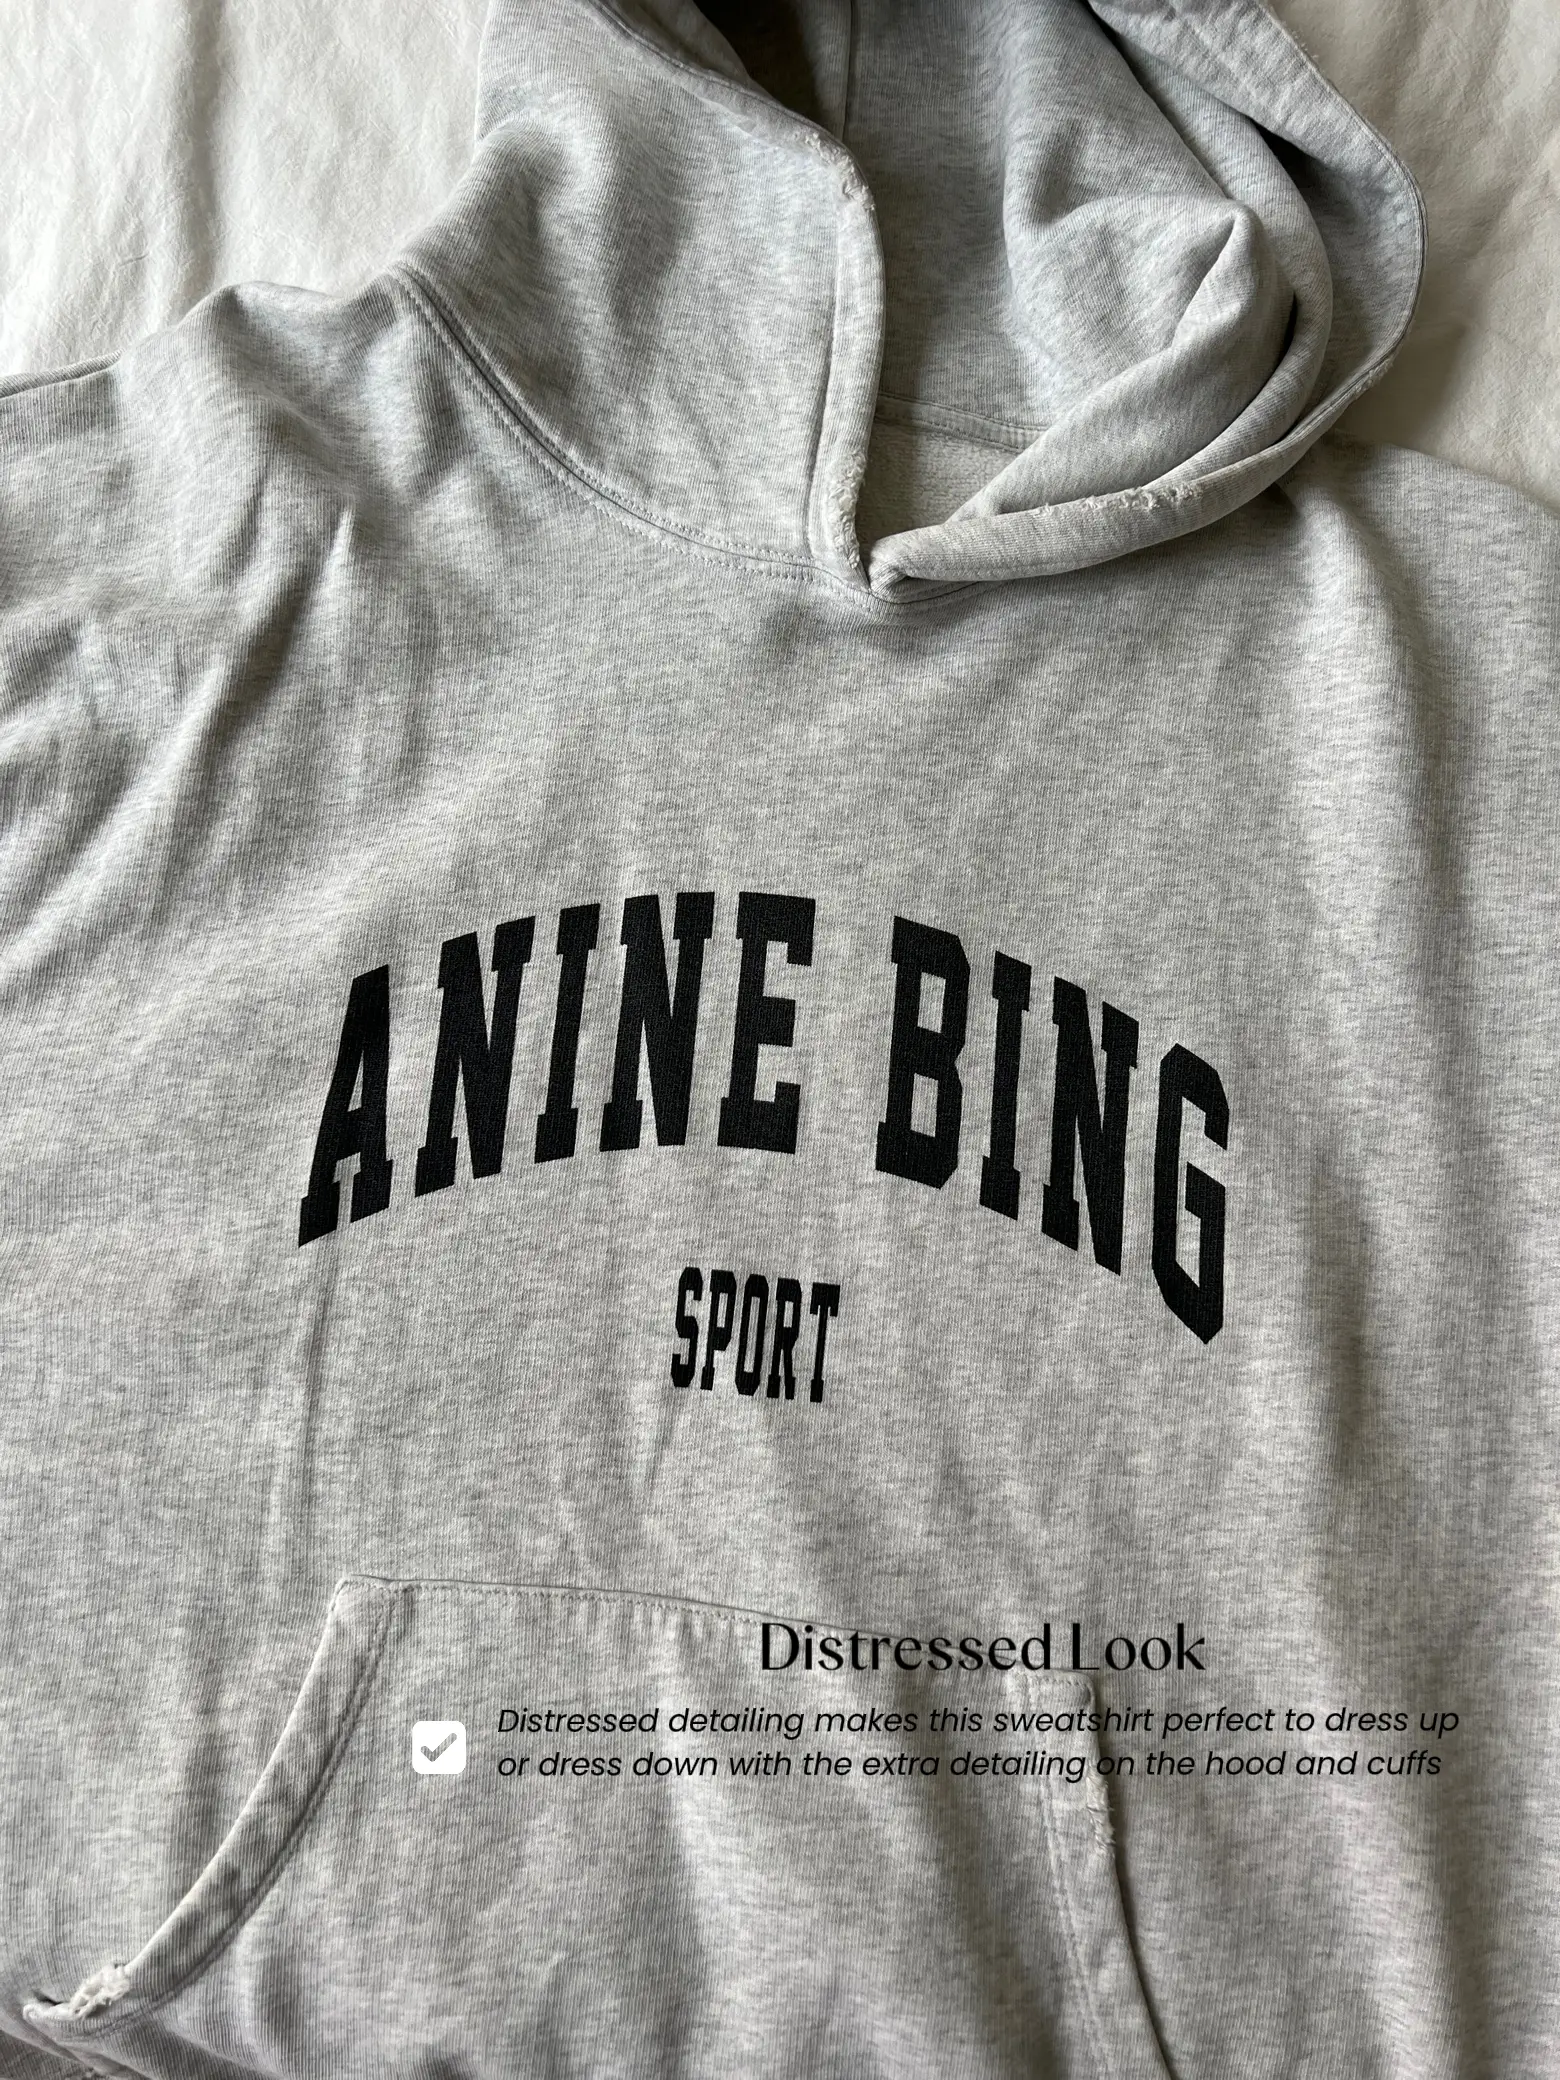 ANINE BING HOODIE REVIEW 🤍, Gallery posted by marissa ♡